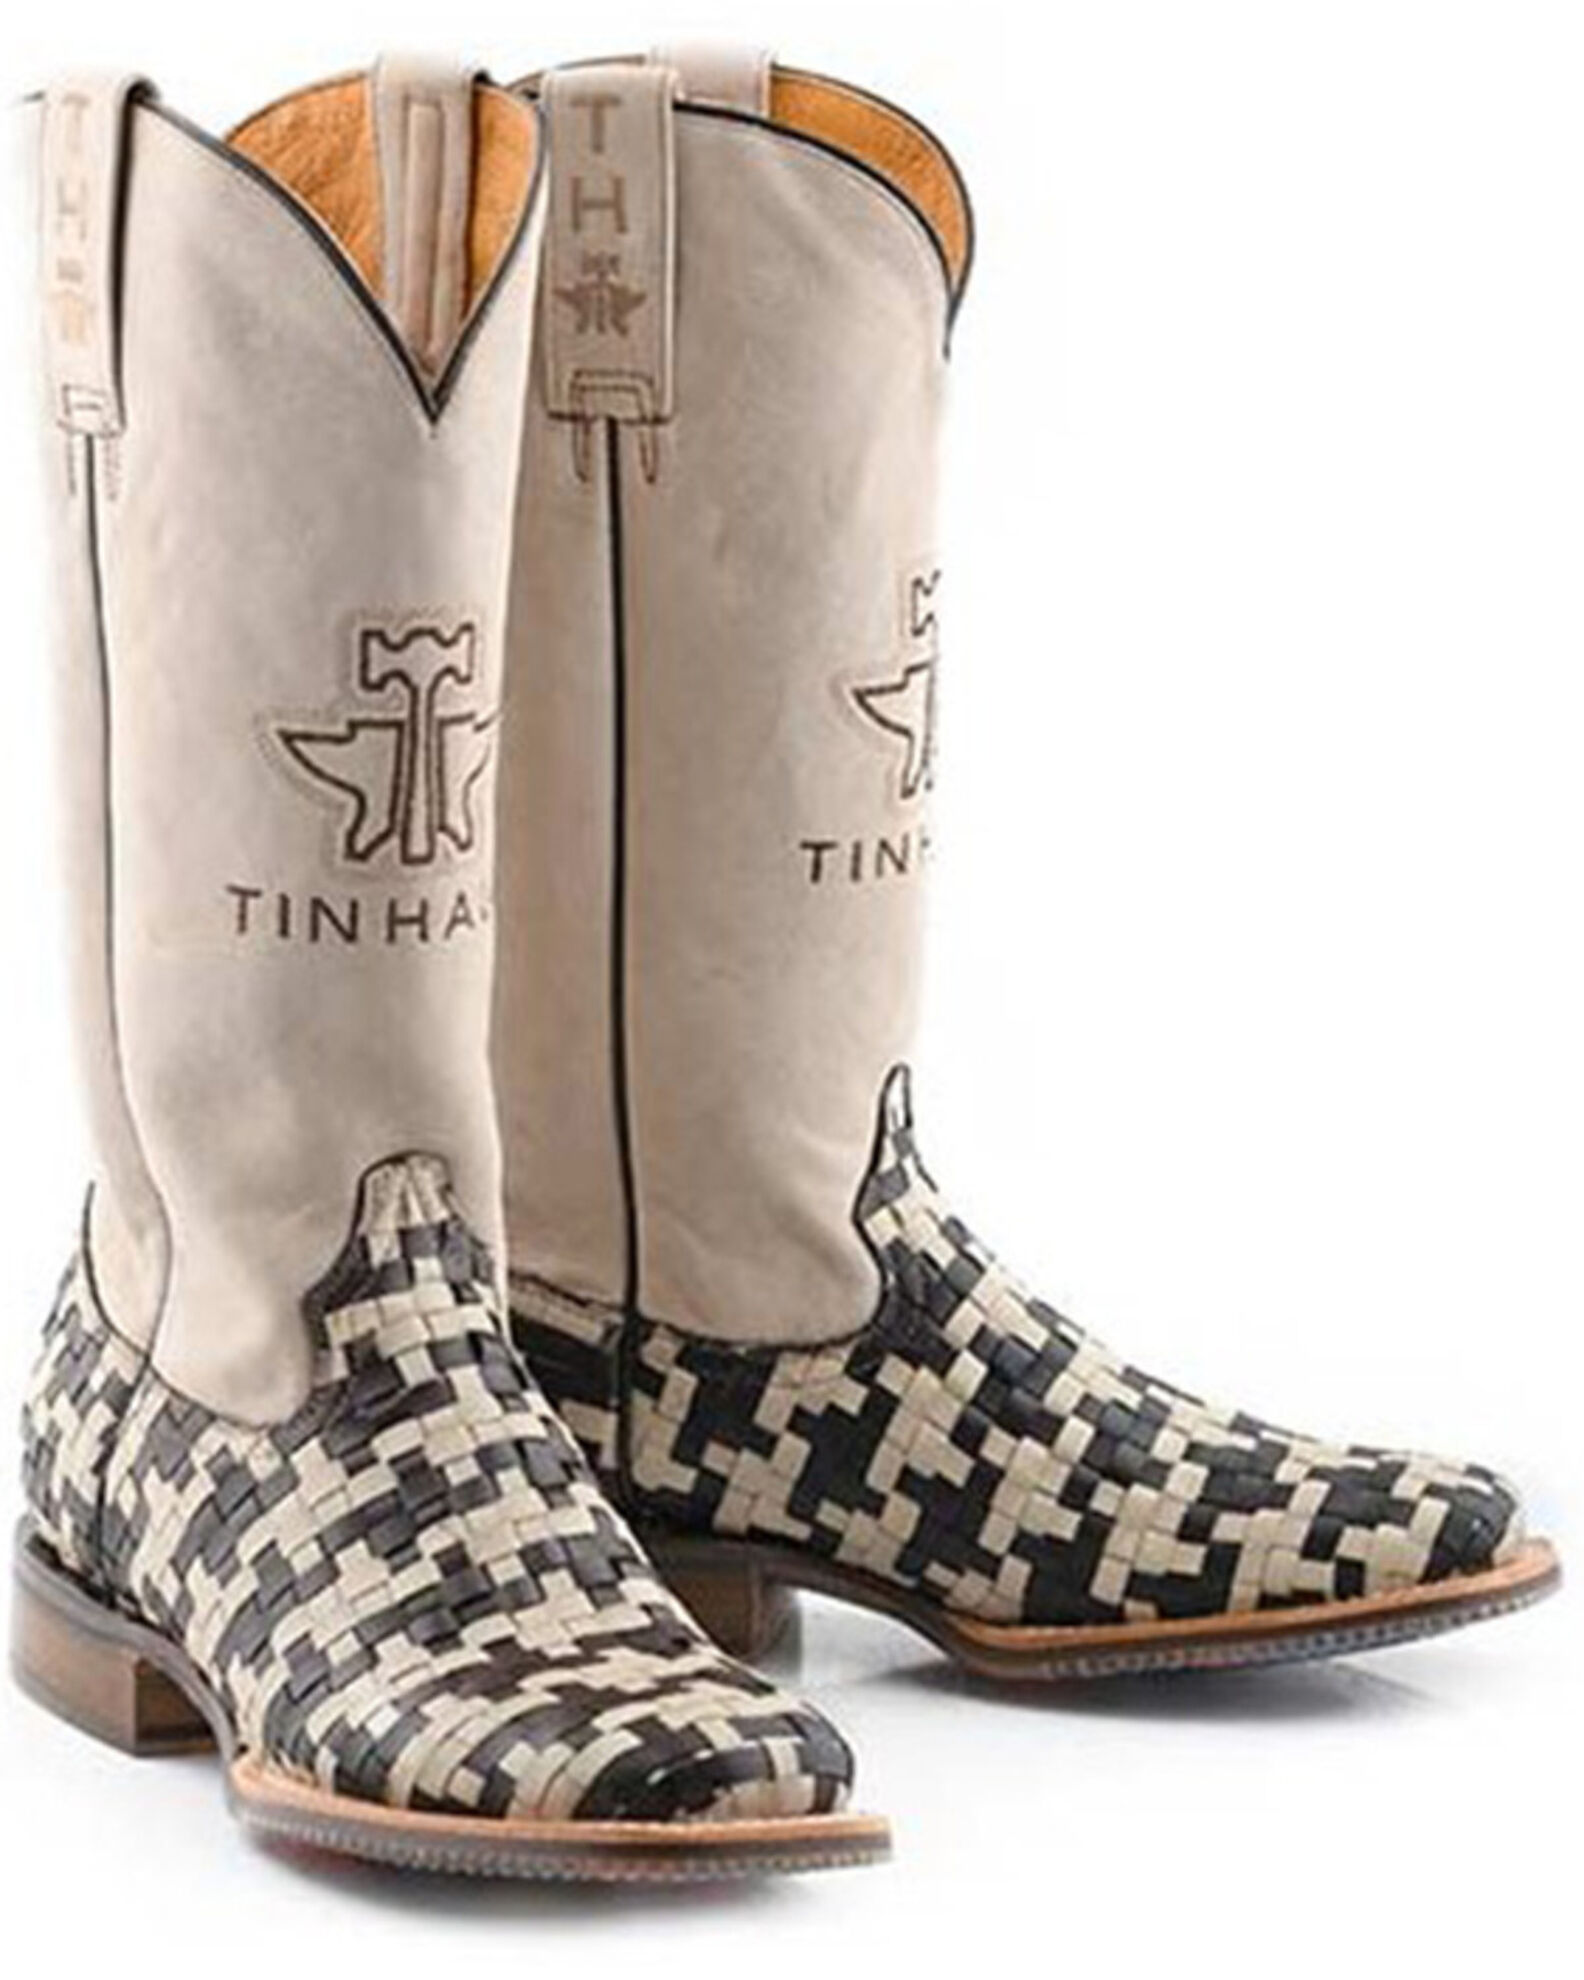 Product Name: Tin Haul Women's Houndstooth Western Boots - Broad Square Toe